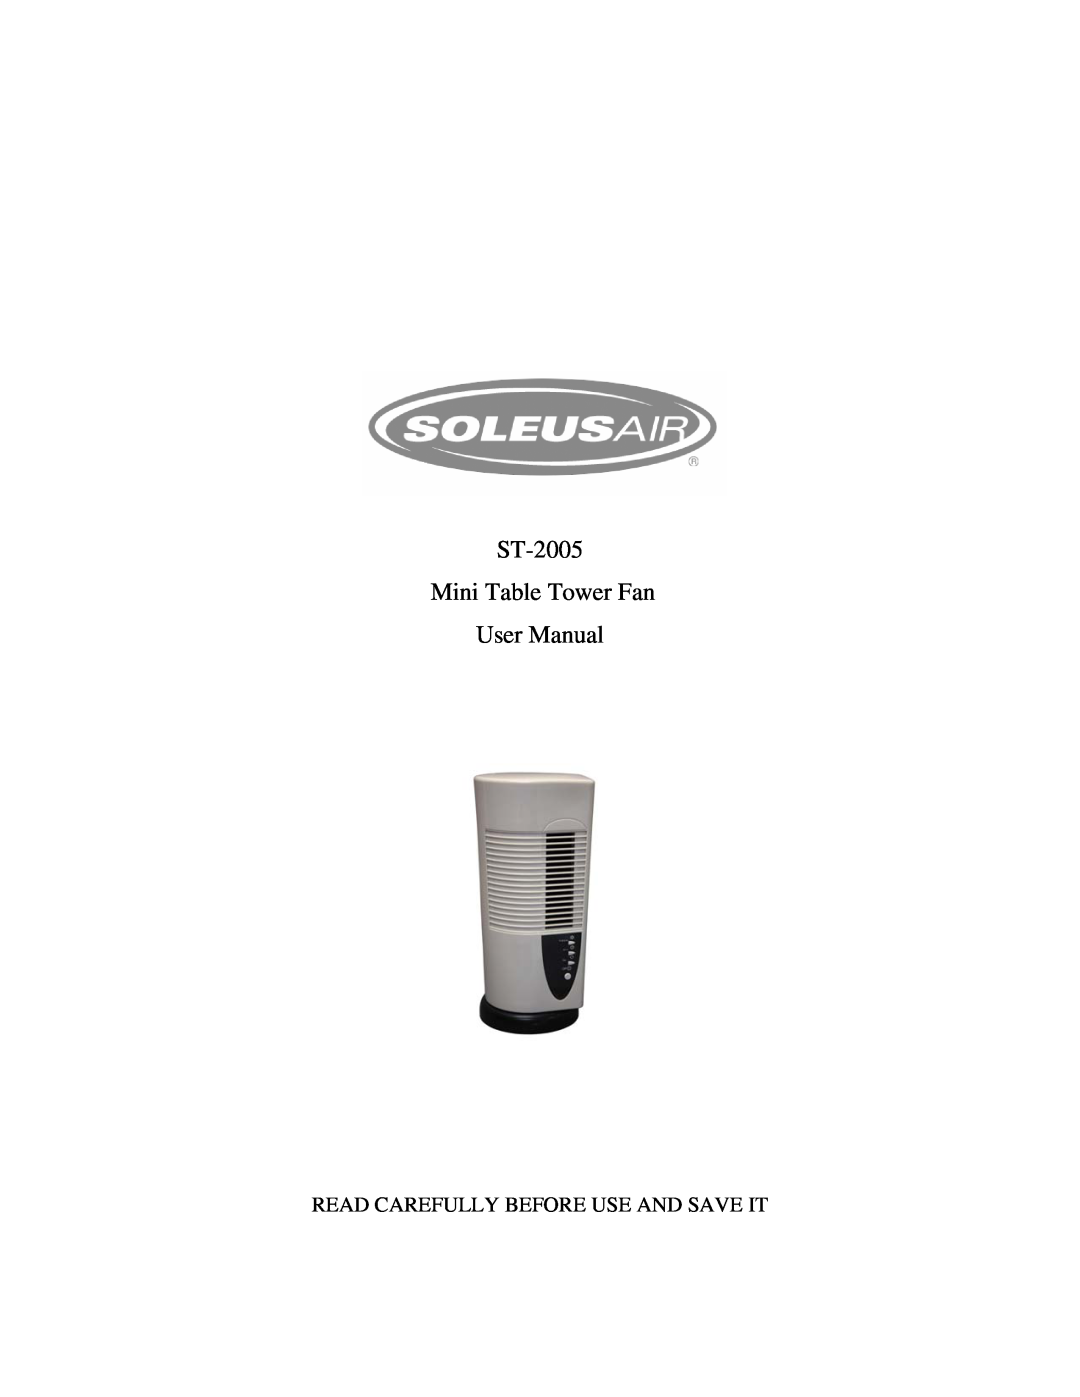 Soleus Air ST-2005 user manual Read Carefully Before Use And Save It 